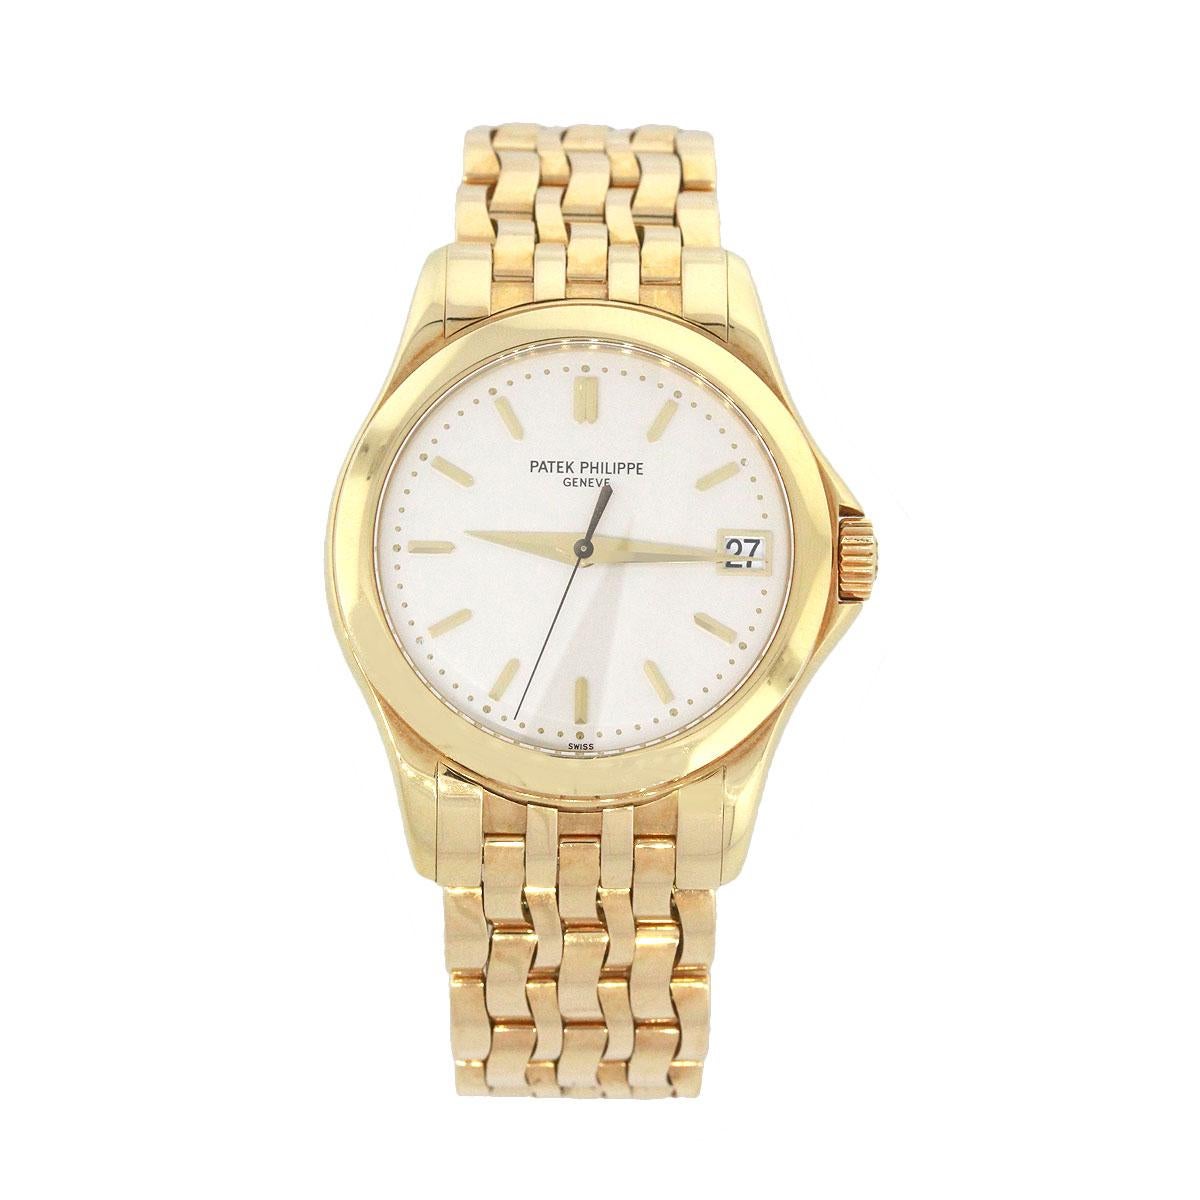 Brand: Patek Philippe
MPN: 5107J
Model: Calatrava
Material: 18k Yellow Gold
Dial: White Dial with gold hands and stick markers, date can be found at 3 O’Clock.
Bezel: Smooth 18k yellow gold bezel
Case Measurements: 37mm
Bracelet: 18k Yellow gold